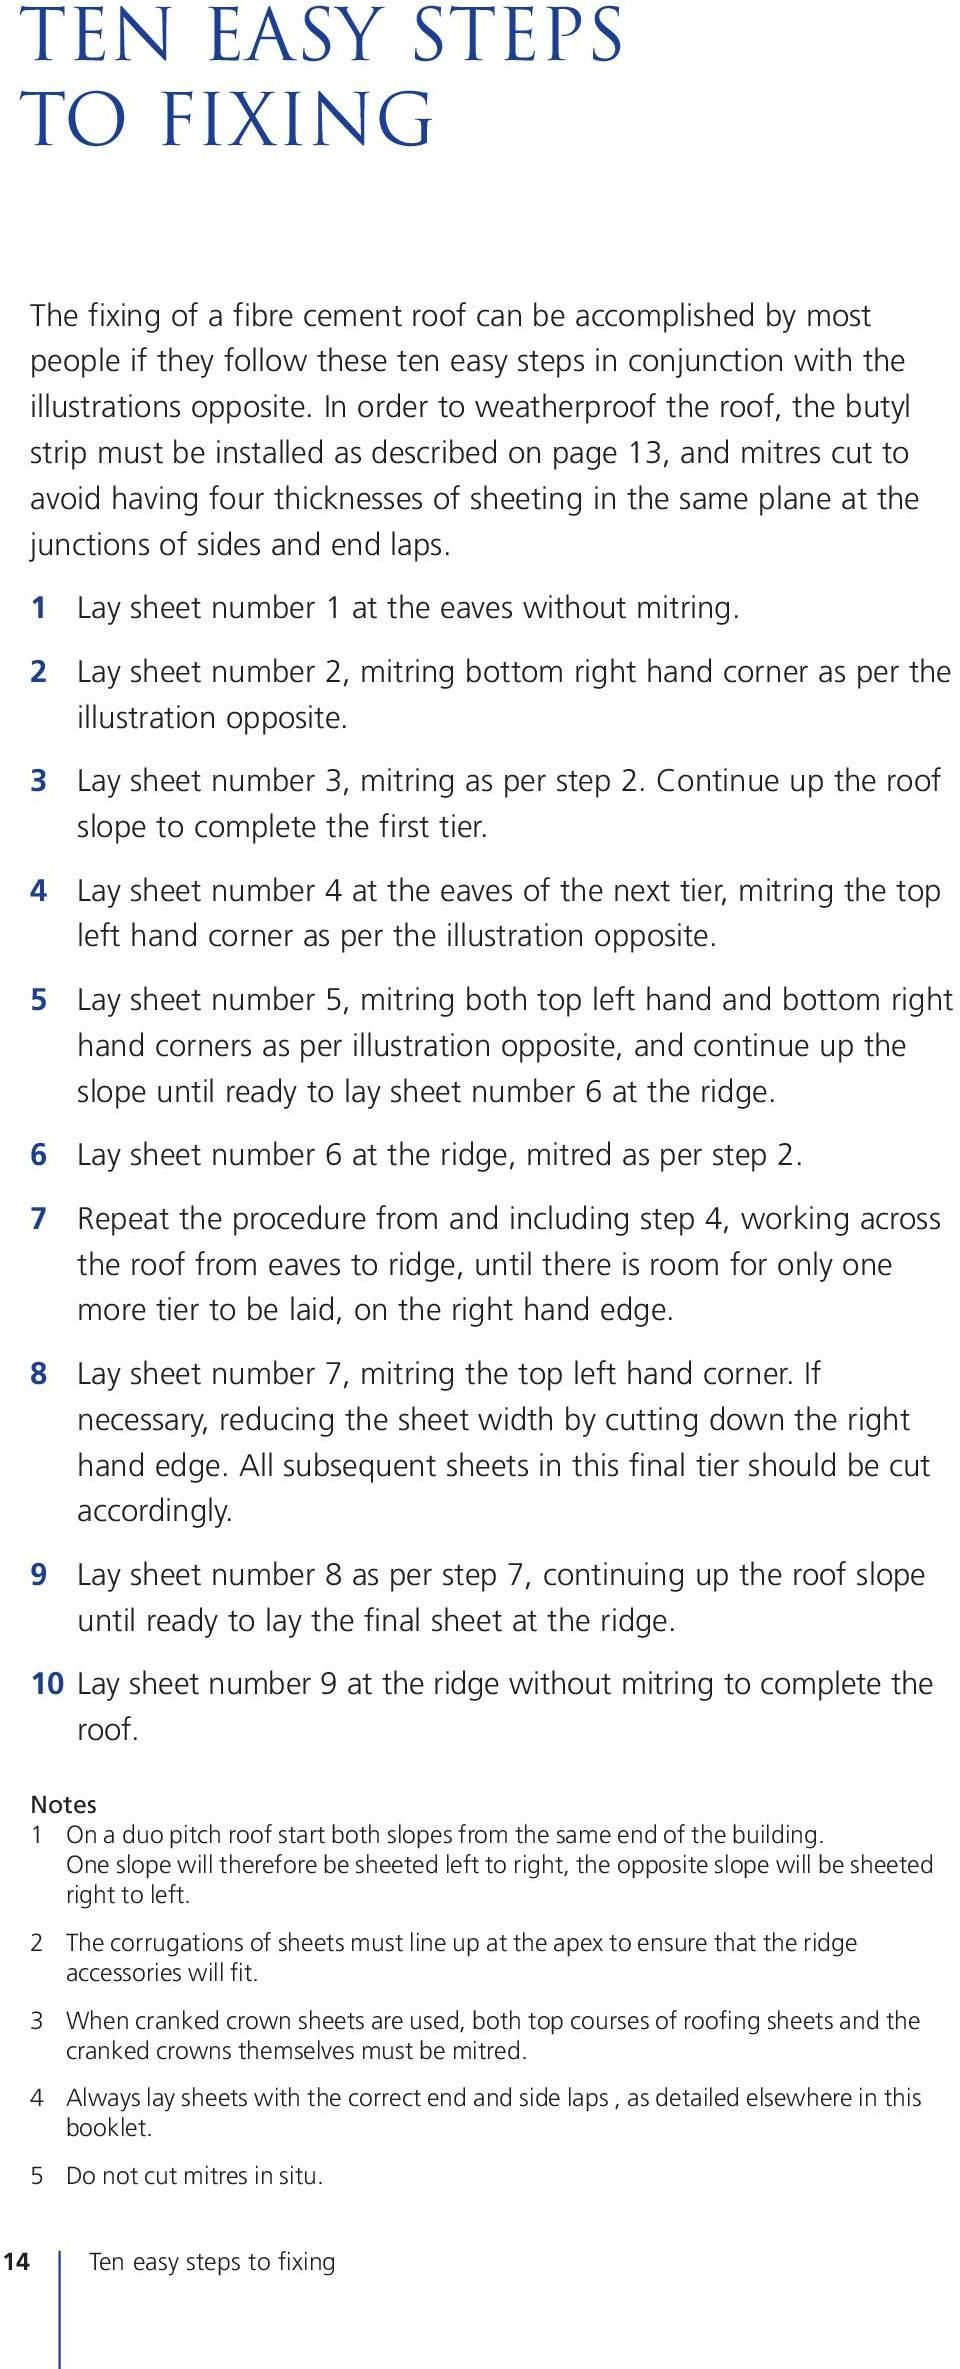 and end laps. 1 Lay sheet number 1 at the eaves without mitring. 2 Lay sheet number 2, mitring bottom right hand corner as per the illustration opposite. 3 Lay sheet number 3, mitring as per step 2.